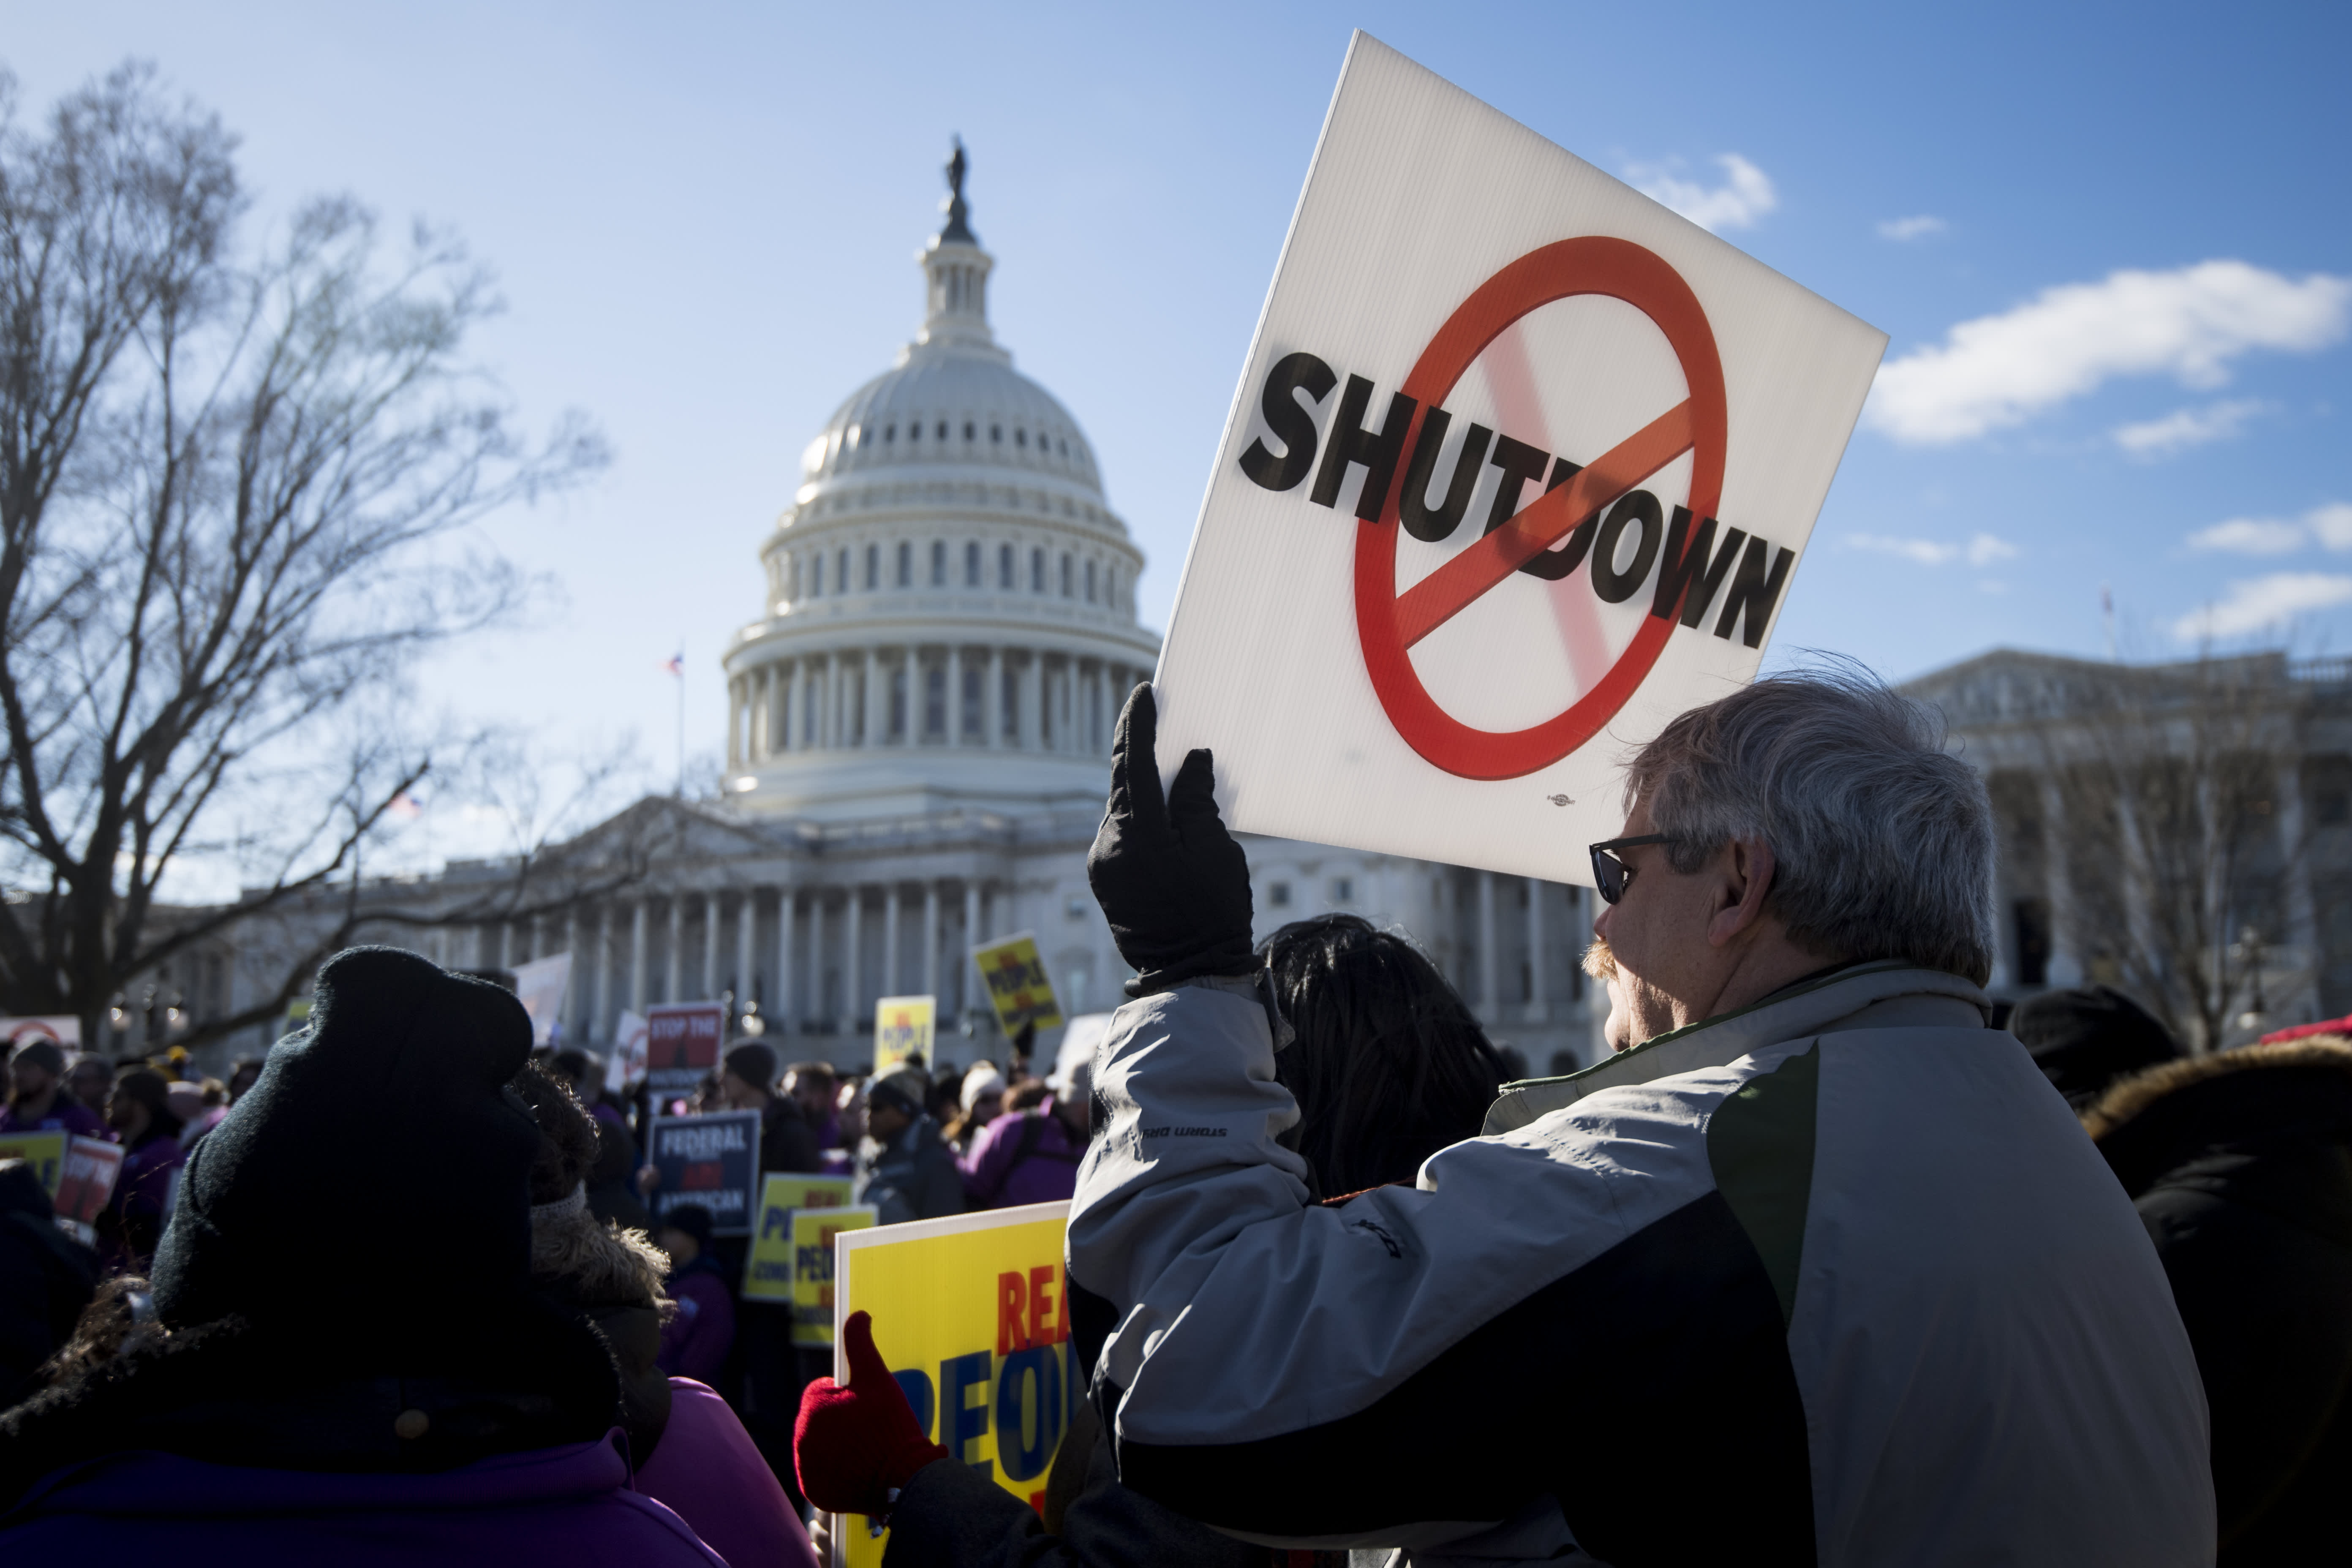 The government shutdown faces mounting lawsuits, including over